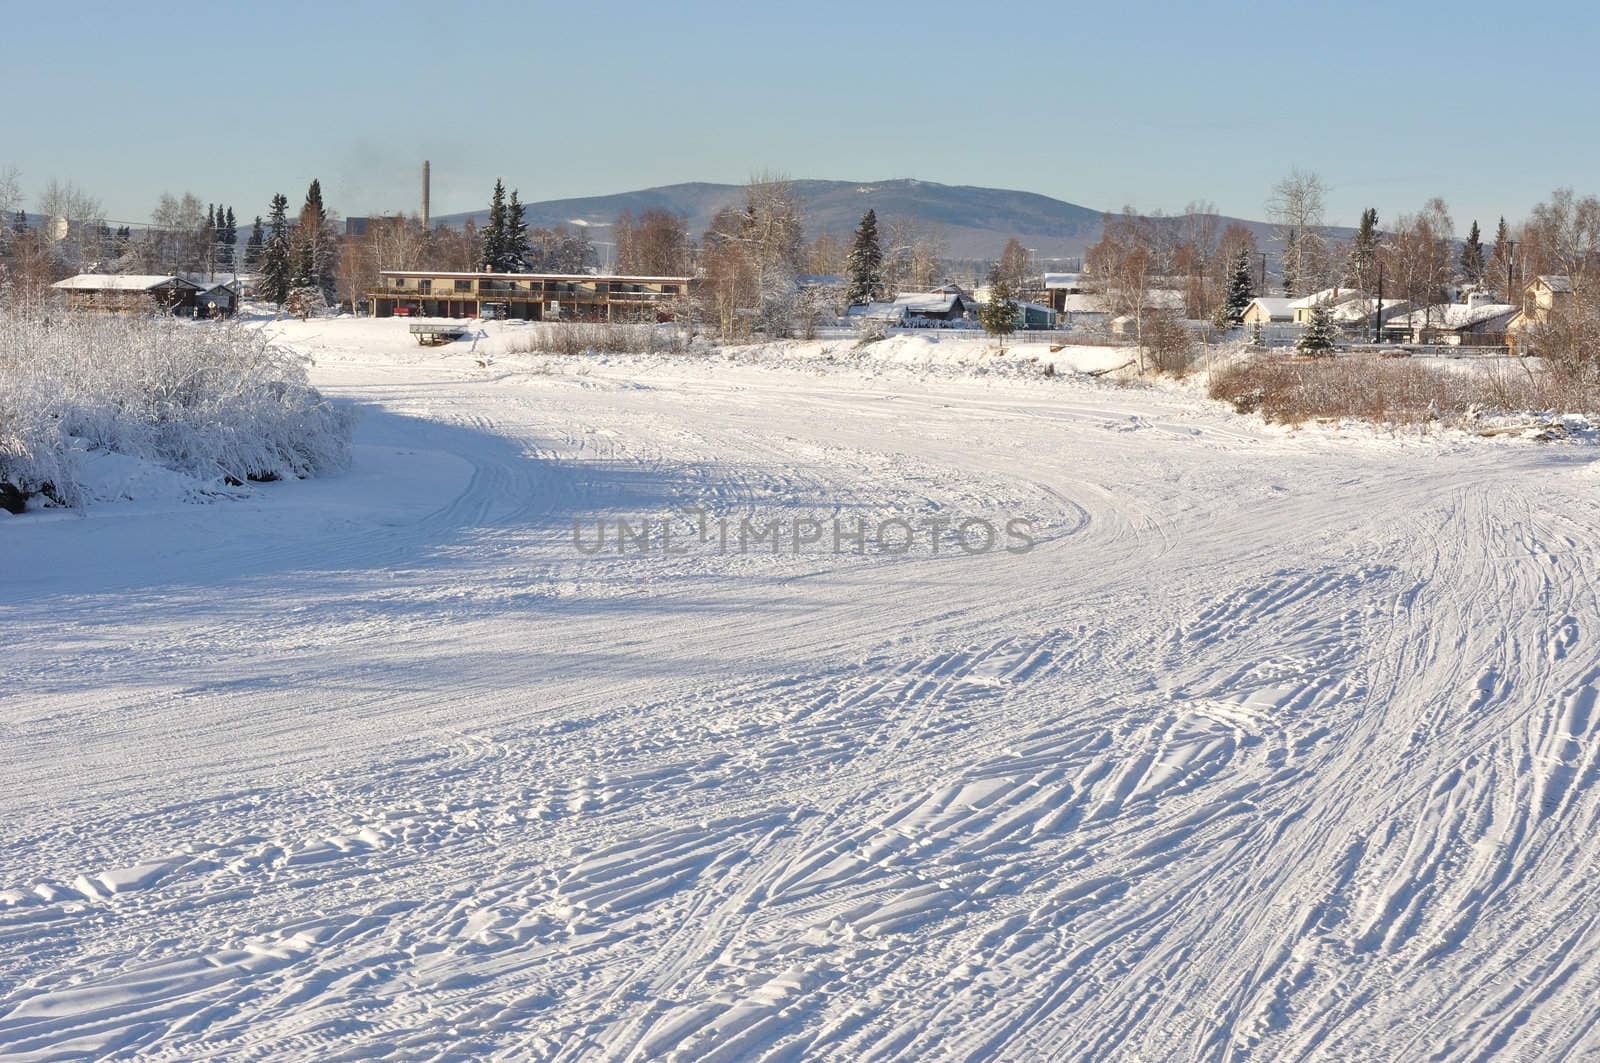 Chena River covered in Snow and Ice in Winter